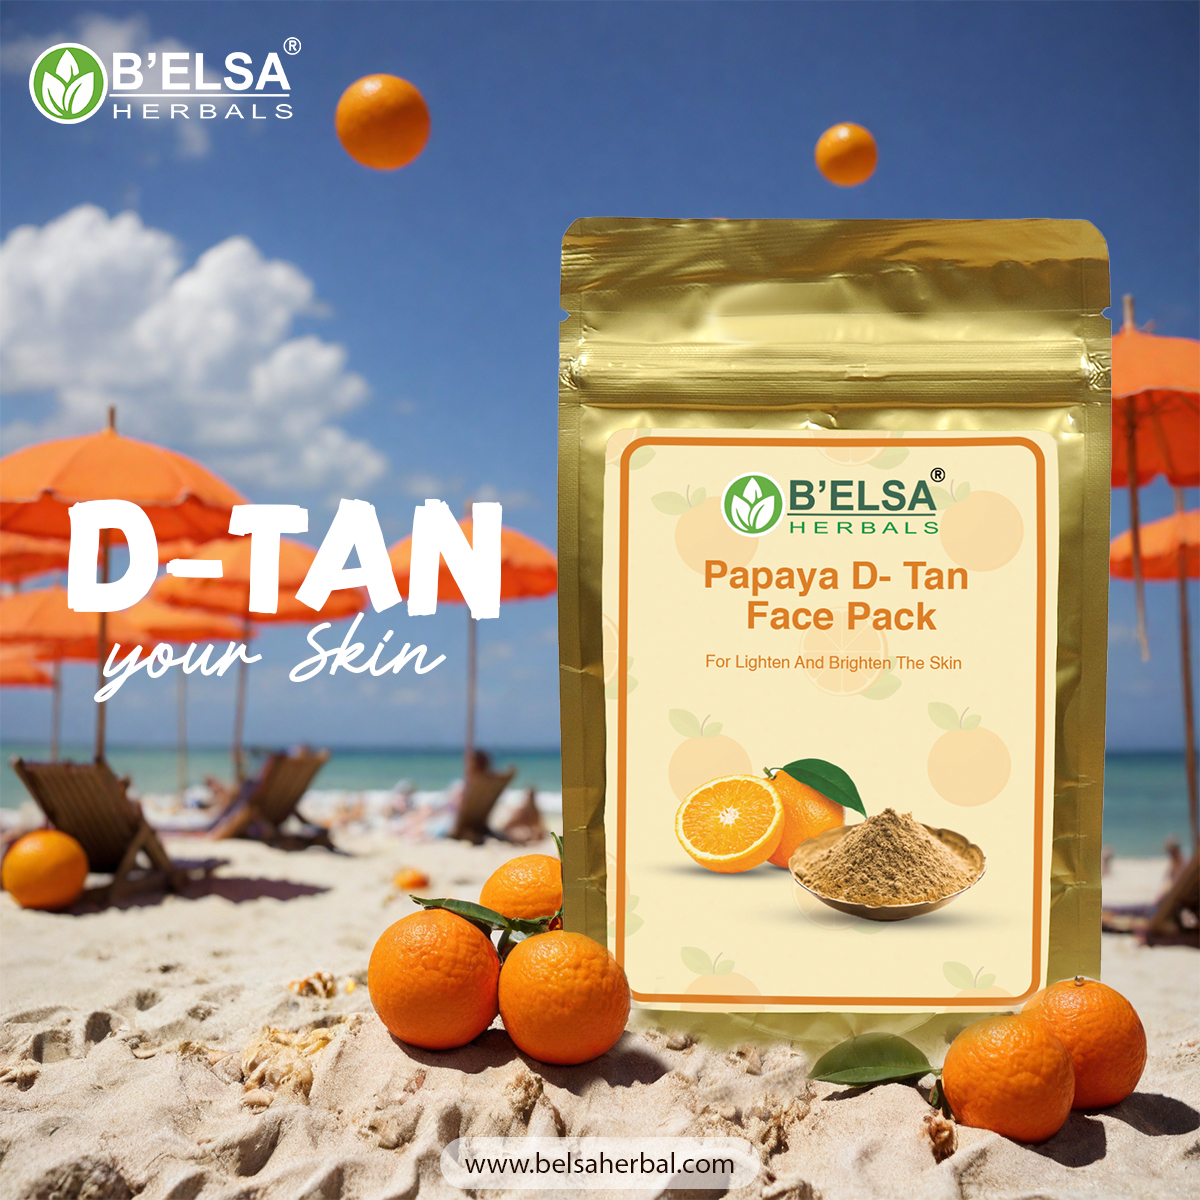 Unleash your radiant glow with D Tan: Embrace the warmth of the sun, minus the damage. 🌞✨

belsaherbal.com

#belsa #herbal #SunKissedSkin #TanGoals #SummerReady #GlowUp #BronzedBeauty #SunshineVibes #SkincareEssentials #RadiantComplexion #DTanMagic #HealthyGlow